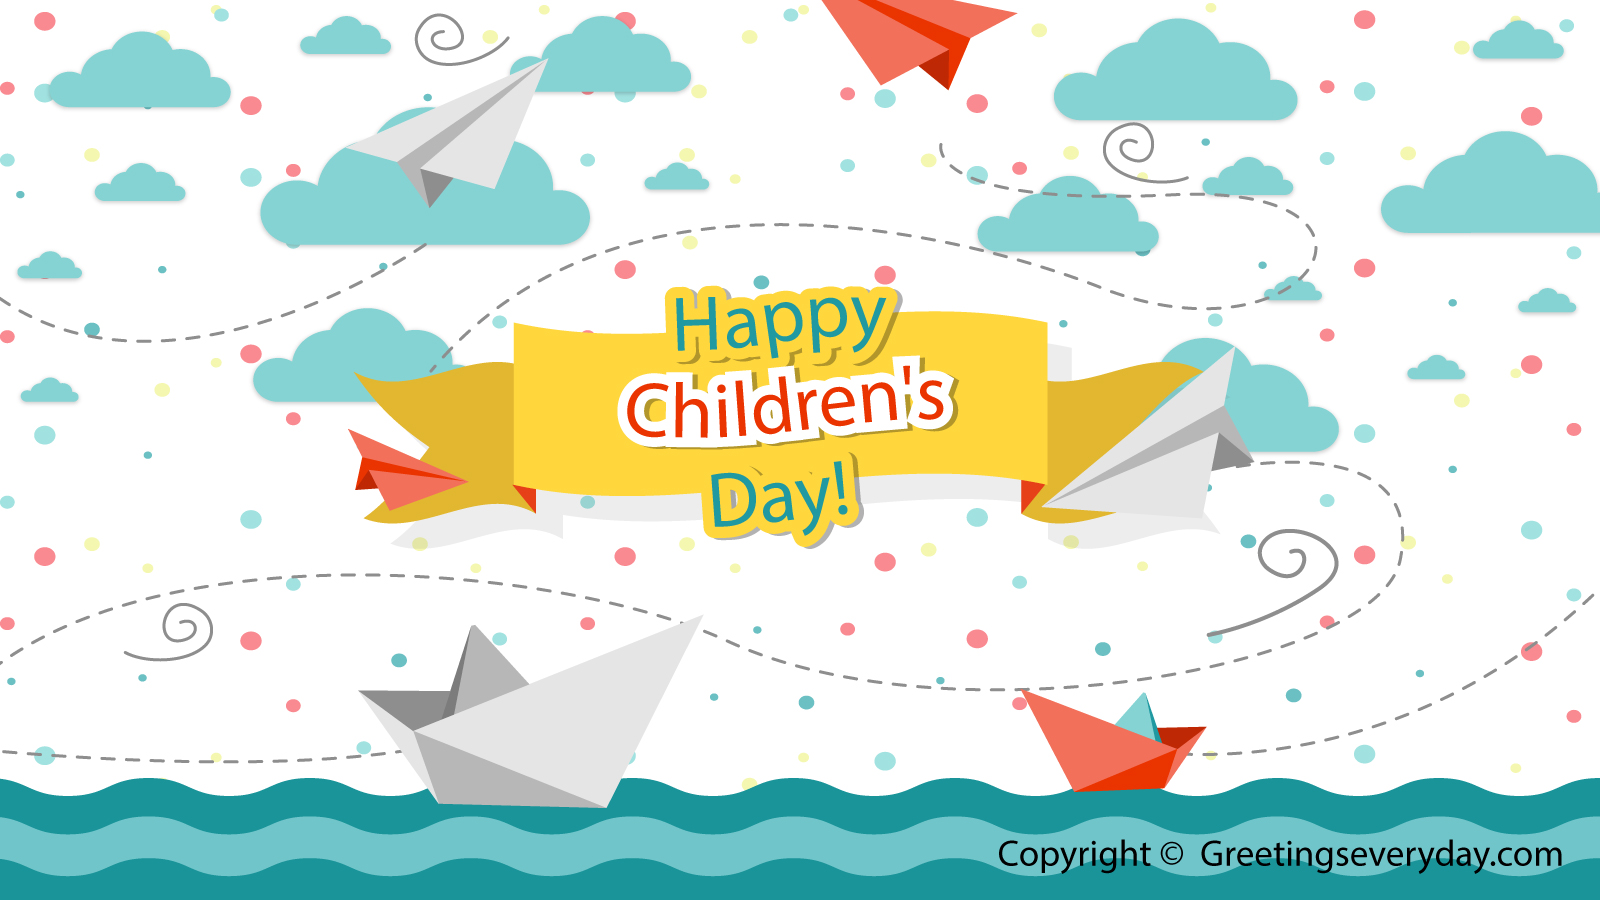 Children's Day Images For WhatsApp